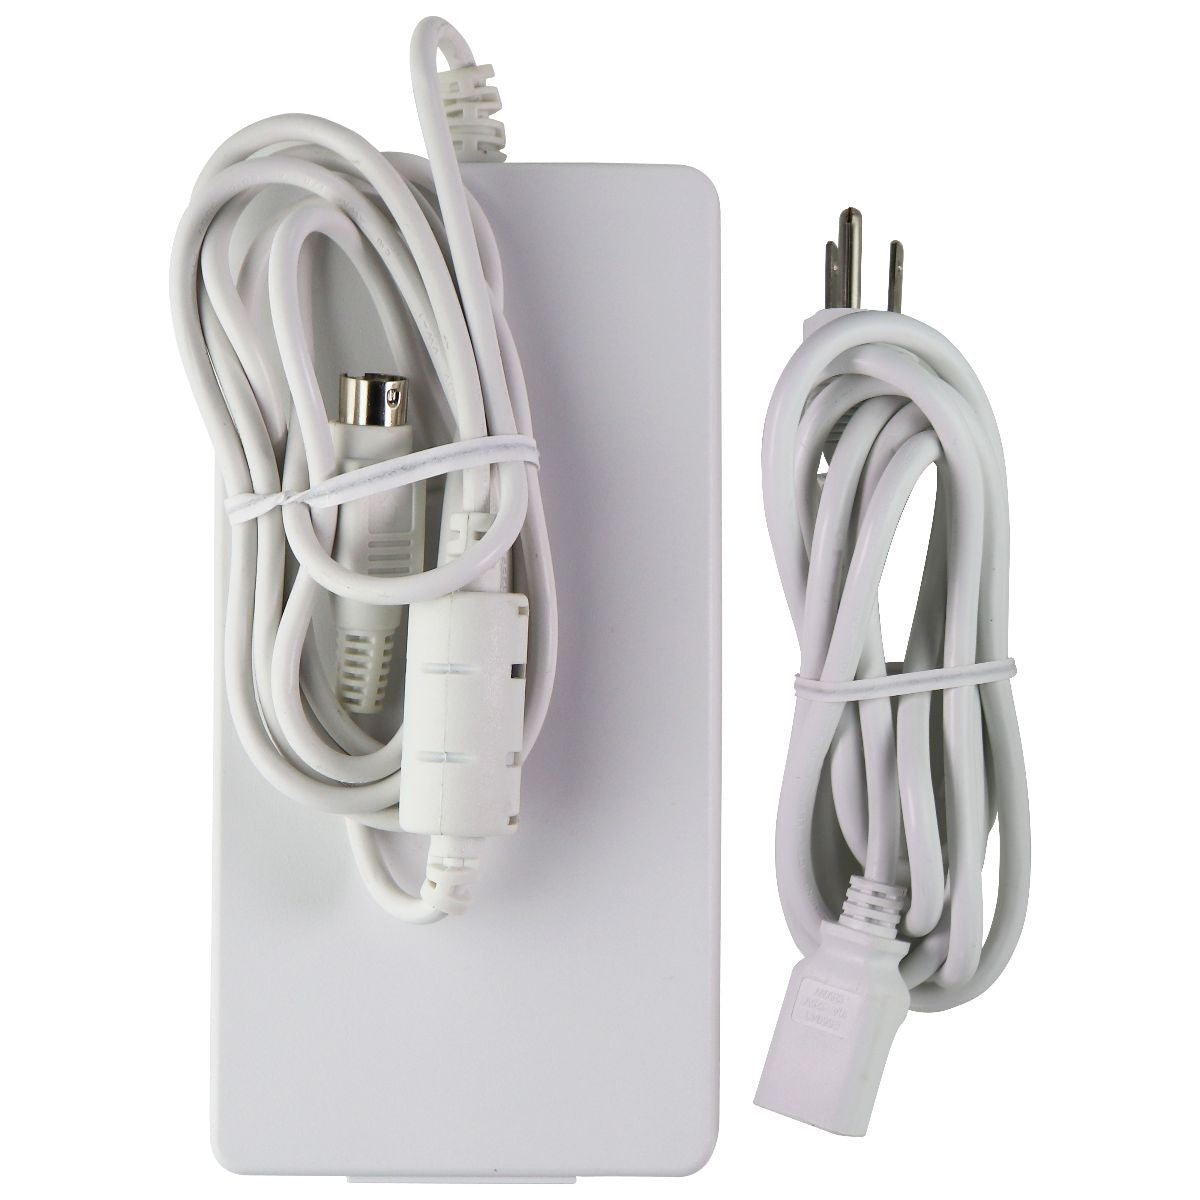 FSP Group Inc. Switching Power Adapter with 4 Pin DIN - White (FSP120-AWAN3-W) Multipurpose Batteries & Power - Multipurpose AC to DC Adapters FSP Group Inc.    - Simple Cell Bulk Wholesale Pricing - USA Seller